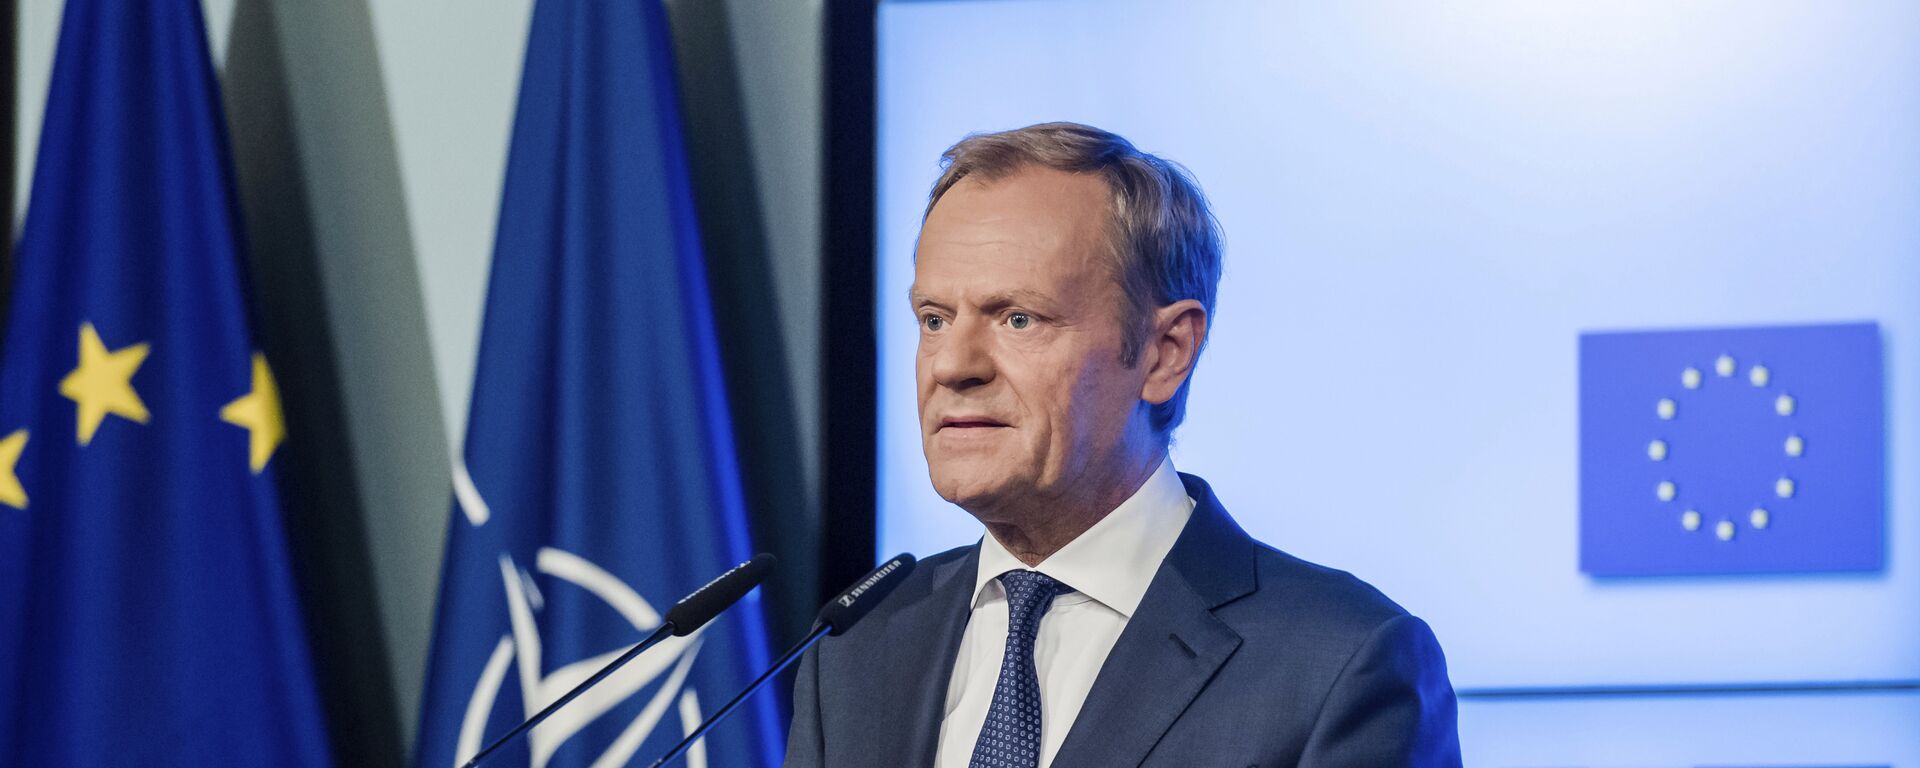 European Council President Donald Tusk addresses the media after the signature of the second EU NATO Joint Declaration, in Brussels on Tuesday, July 10, 2018 - Sputnik International, 1920, 12.12.2023